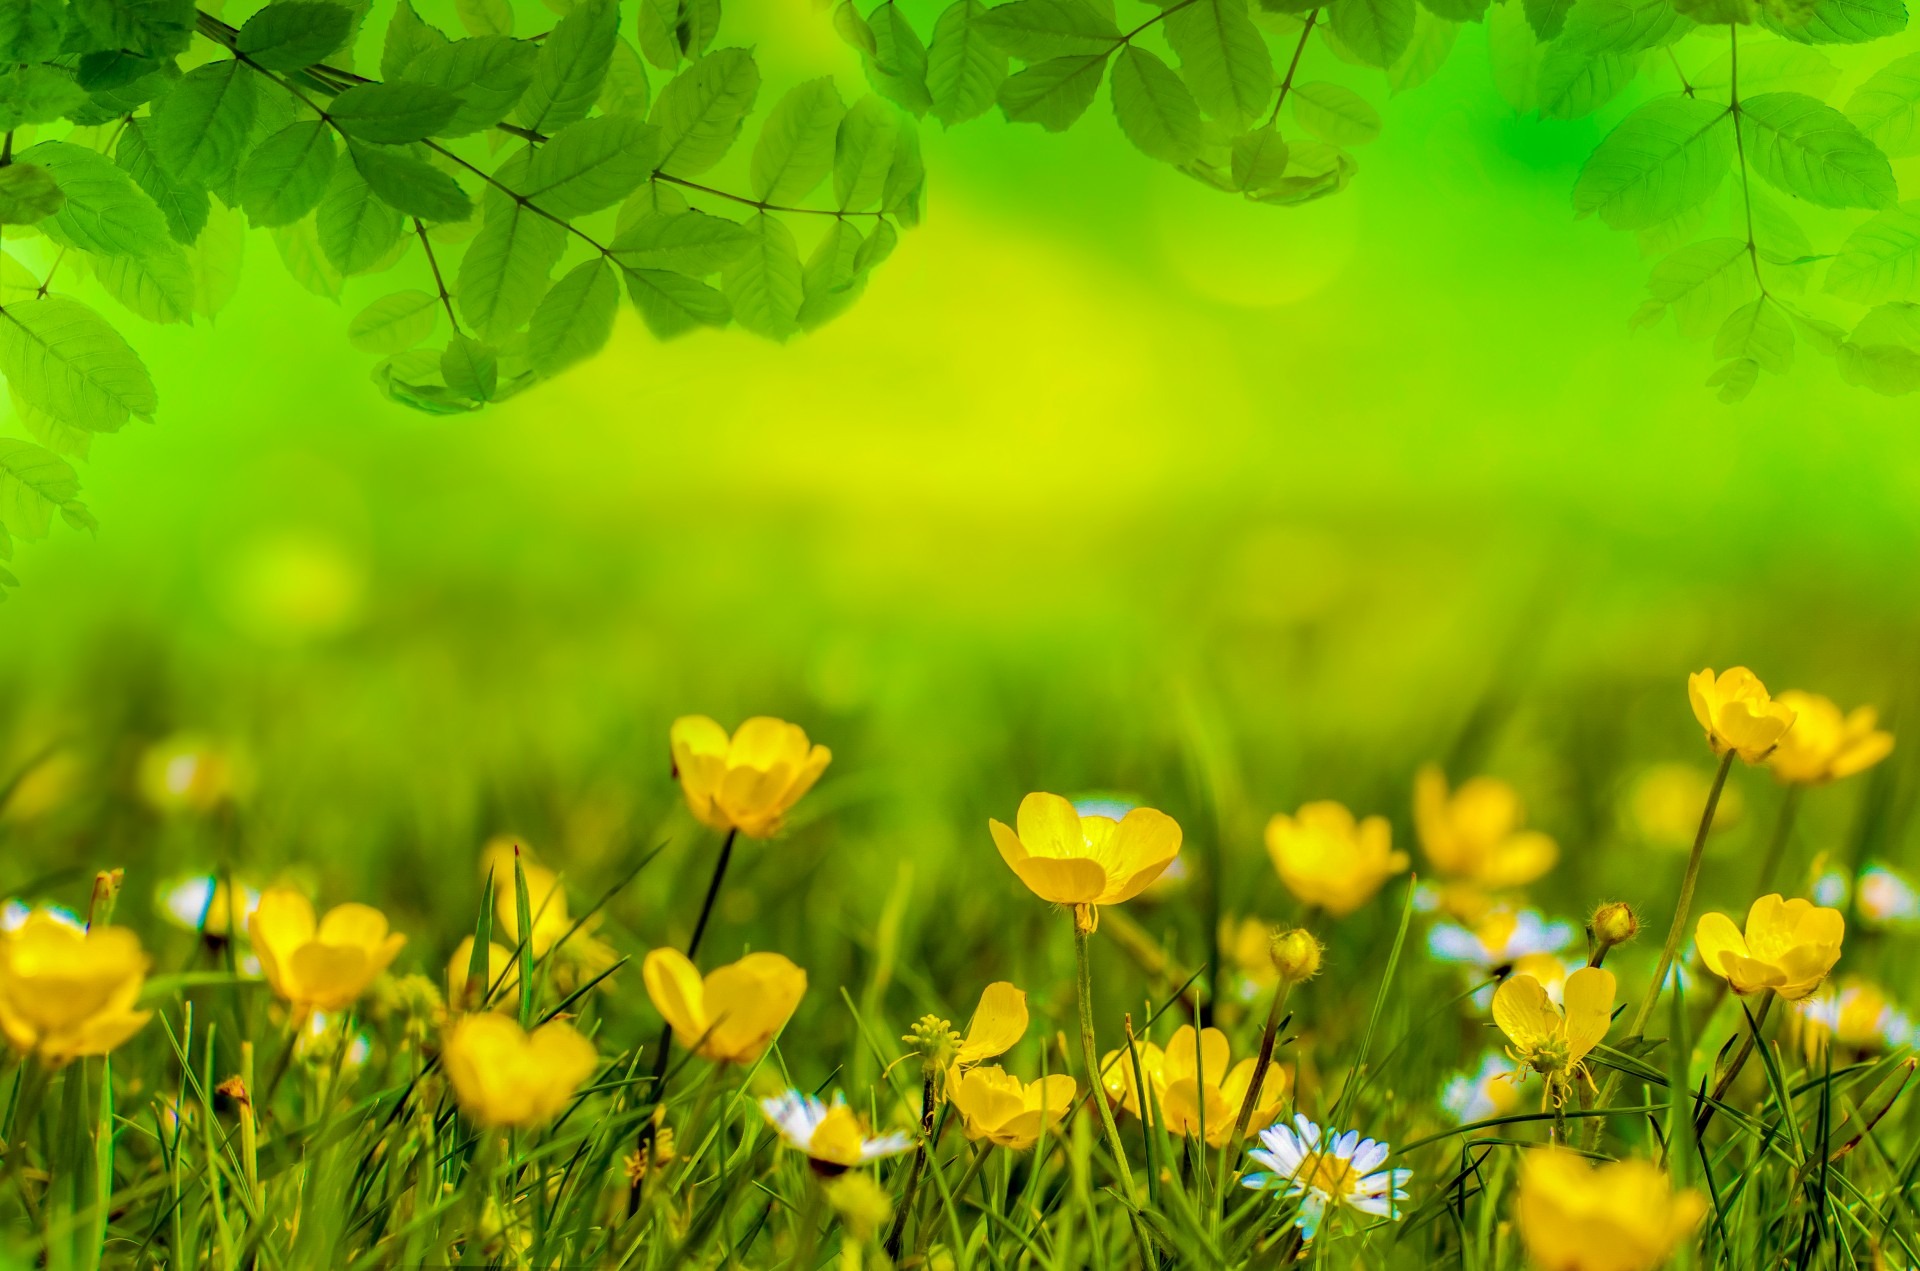 Green grass with yellow flowers